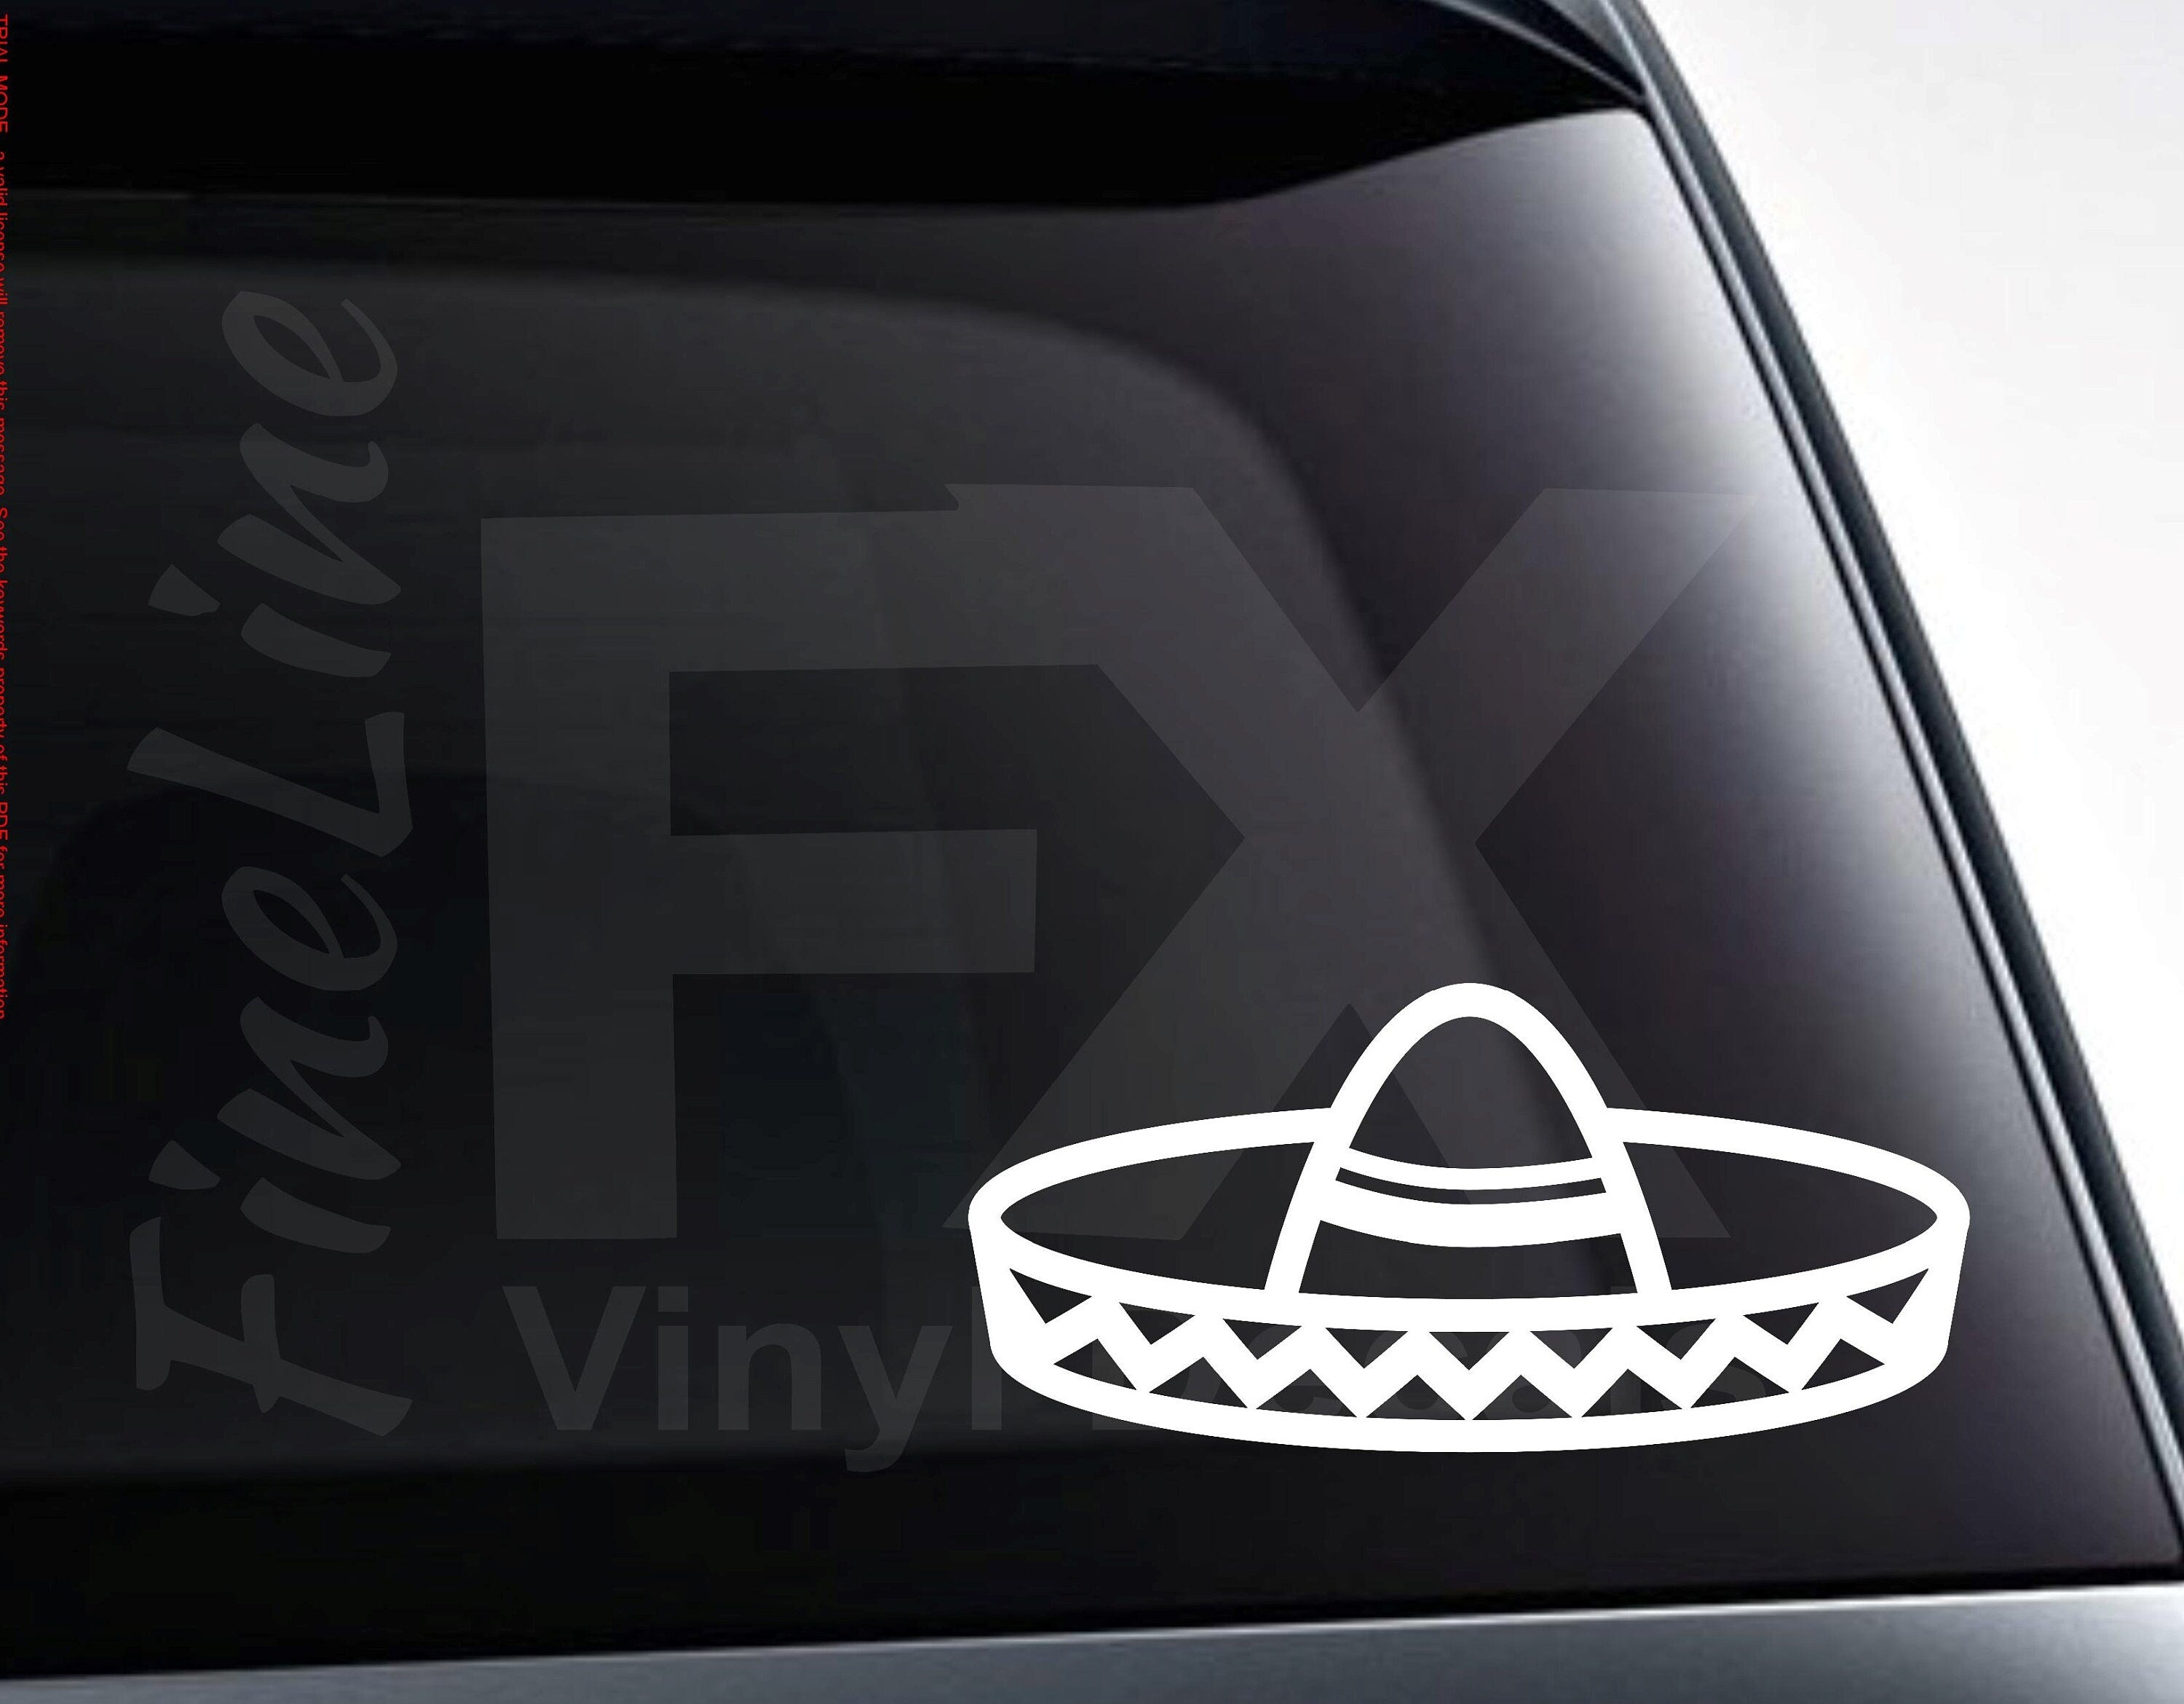 Mexican Decals & Stickers